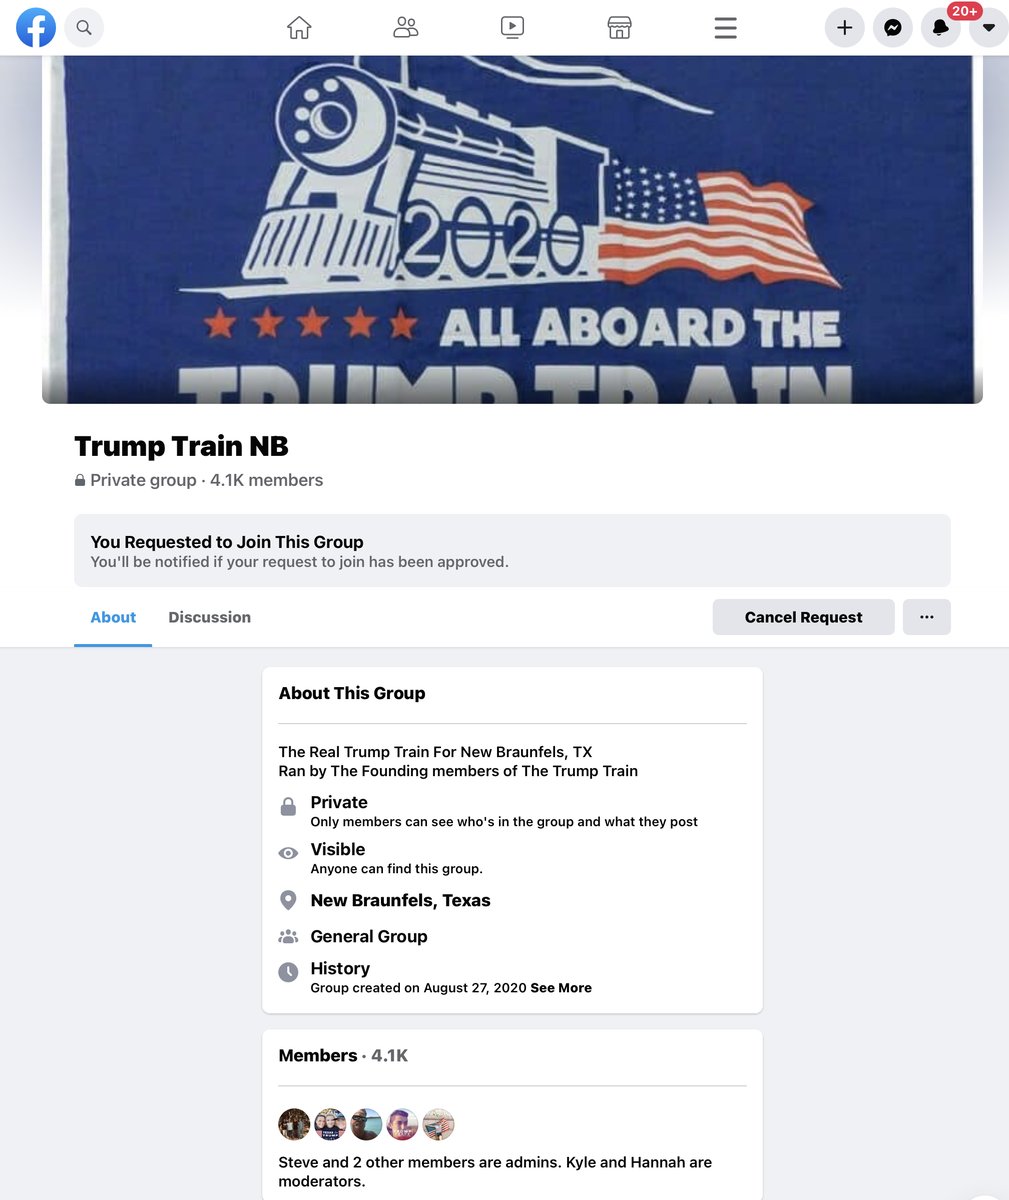 The Trump Train NB was switched to private on Oct 31, 2020They coordinated in this now “private” Facebook group to (these are their words, NOT mine) “ambush the Biden/Harris bus - Locked & loaded” with members posting pics of long guns  https://www.facebook.com/groups/252136099143455